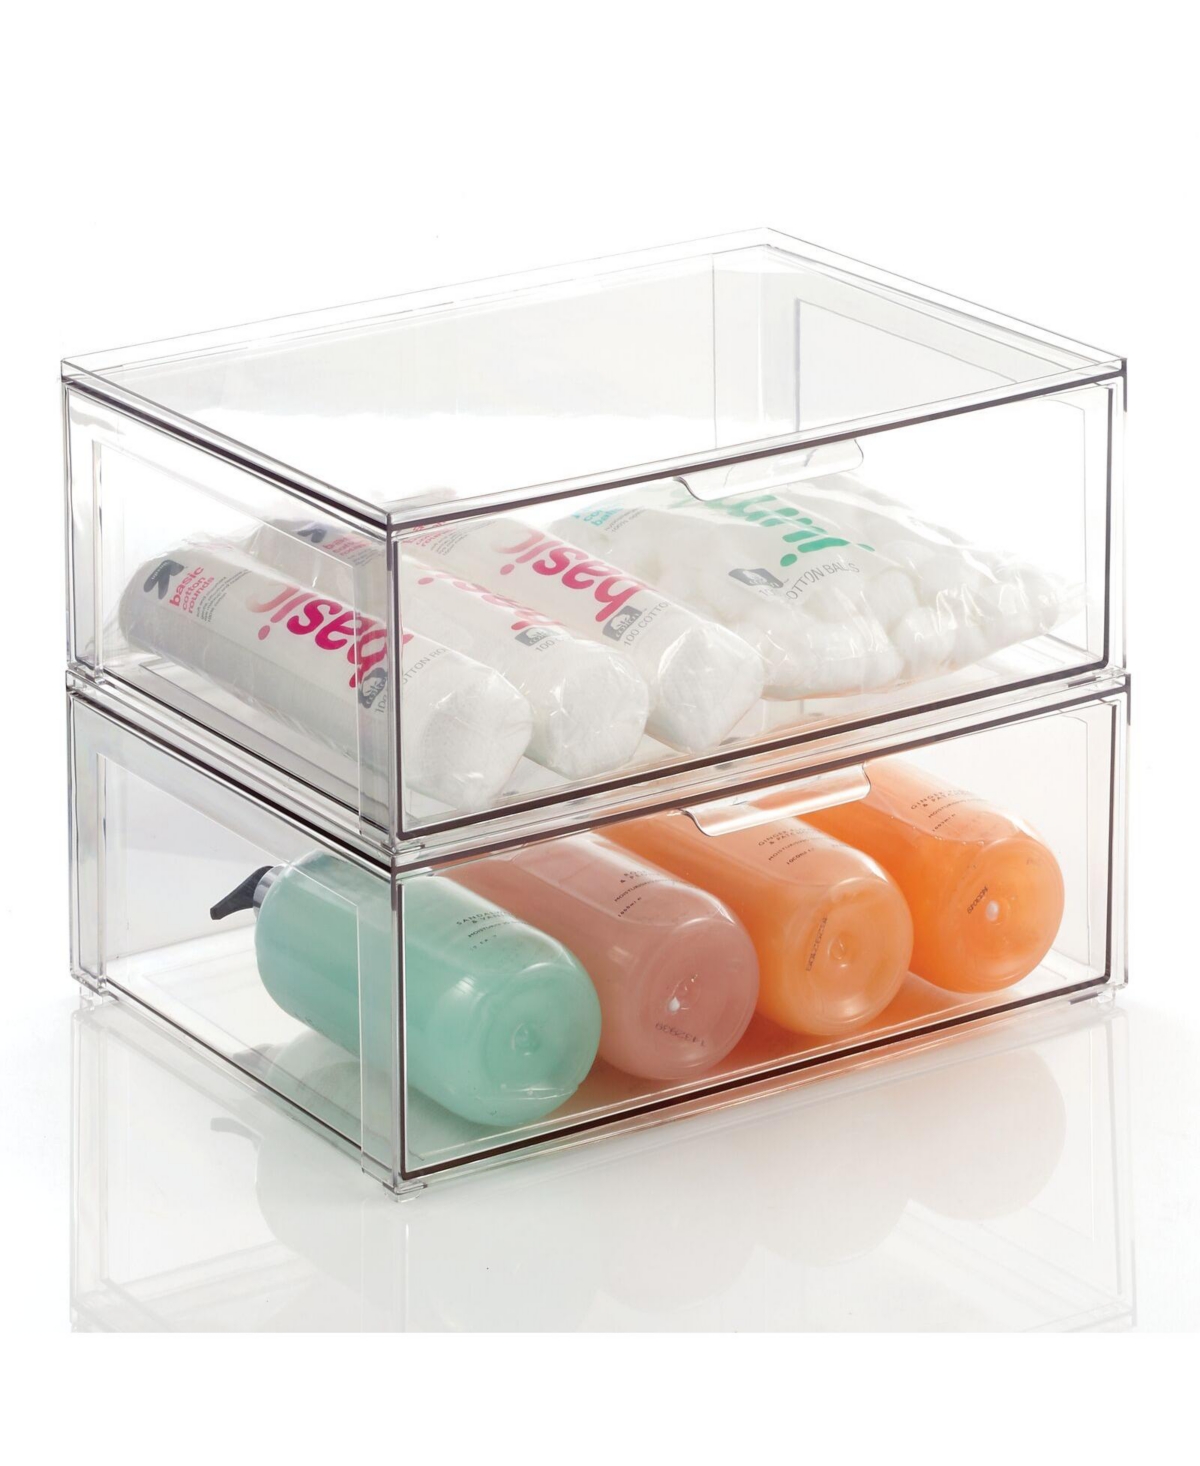 Plastic Stackable Bathroom Storage Organizer with Drawer, 2 Pack - Clear